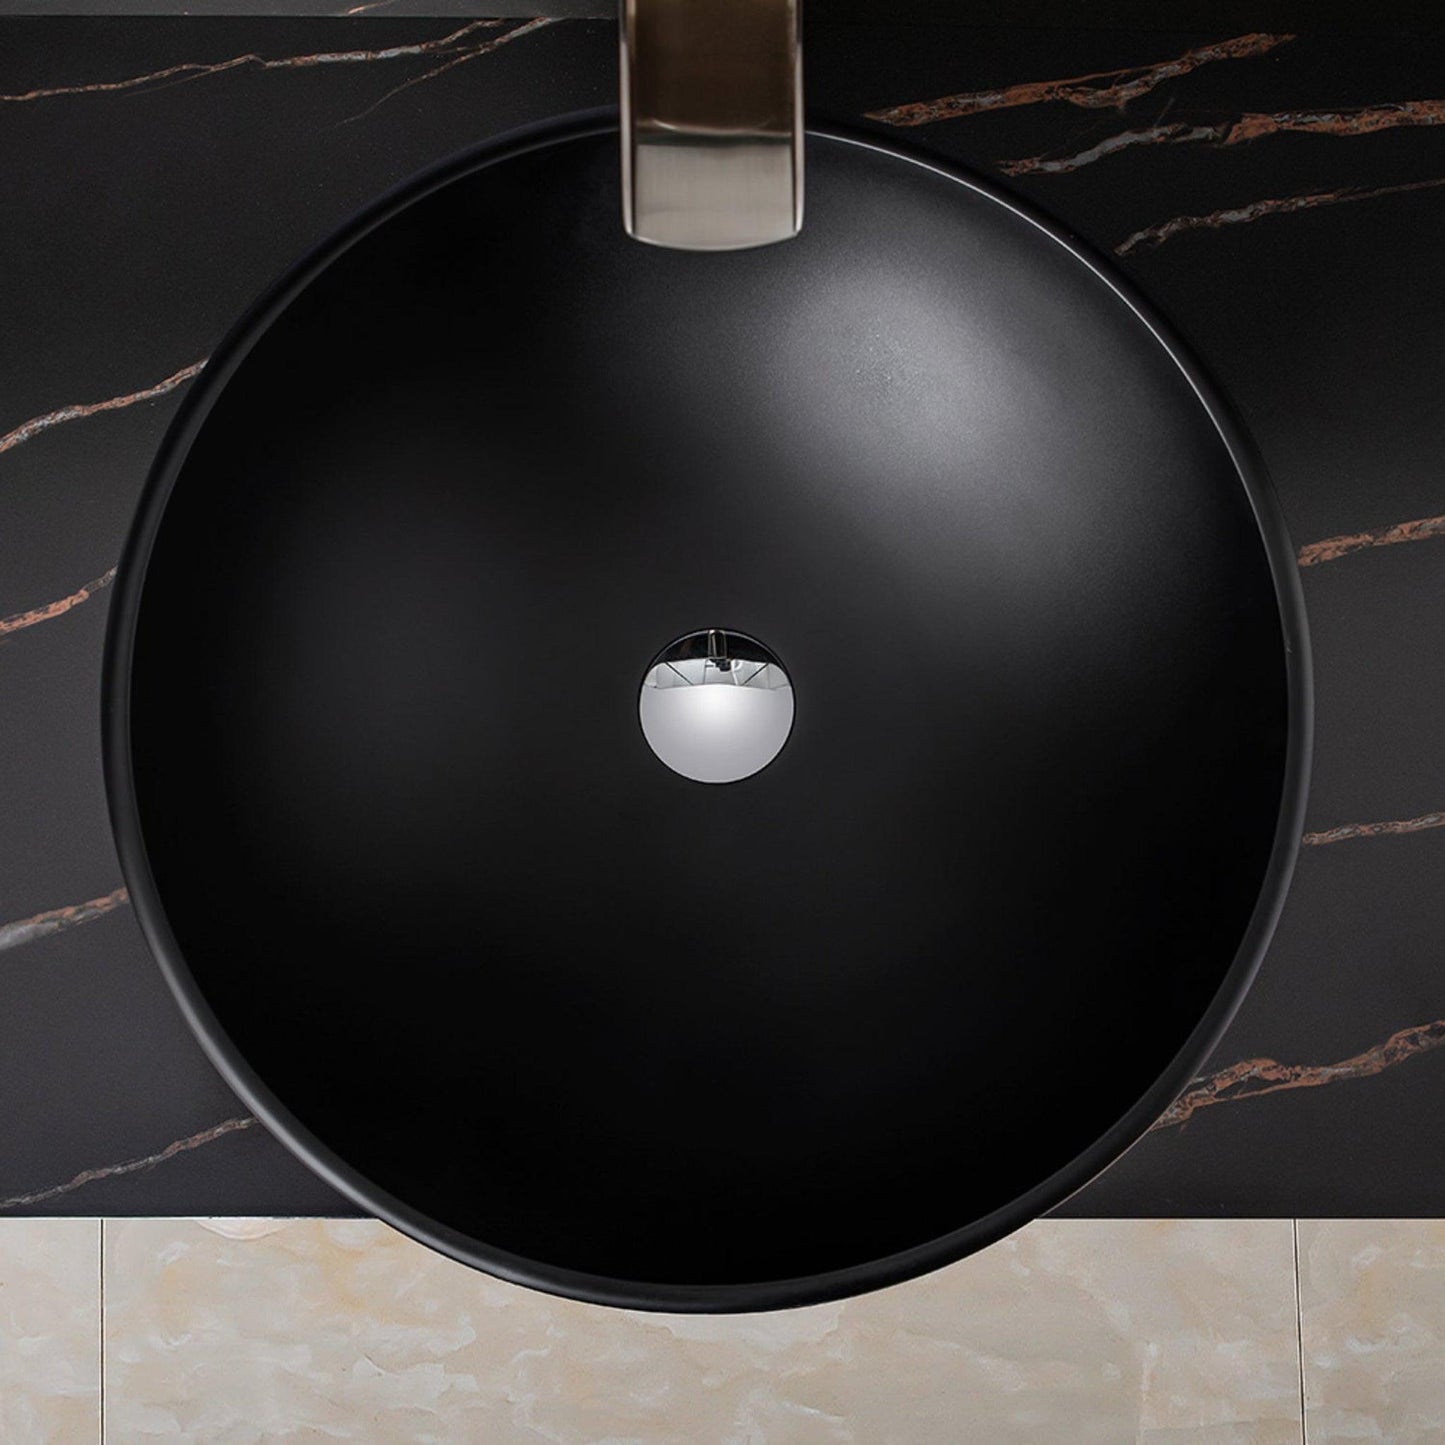 Vinnova Enna 17" Matte Black Circular Tempered Glass Painted by Hand Vessel Bathroom Sink Without Faucet